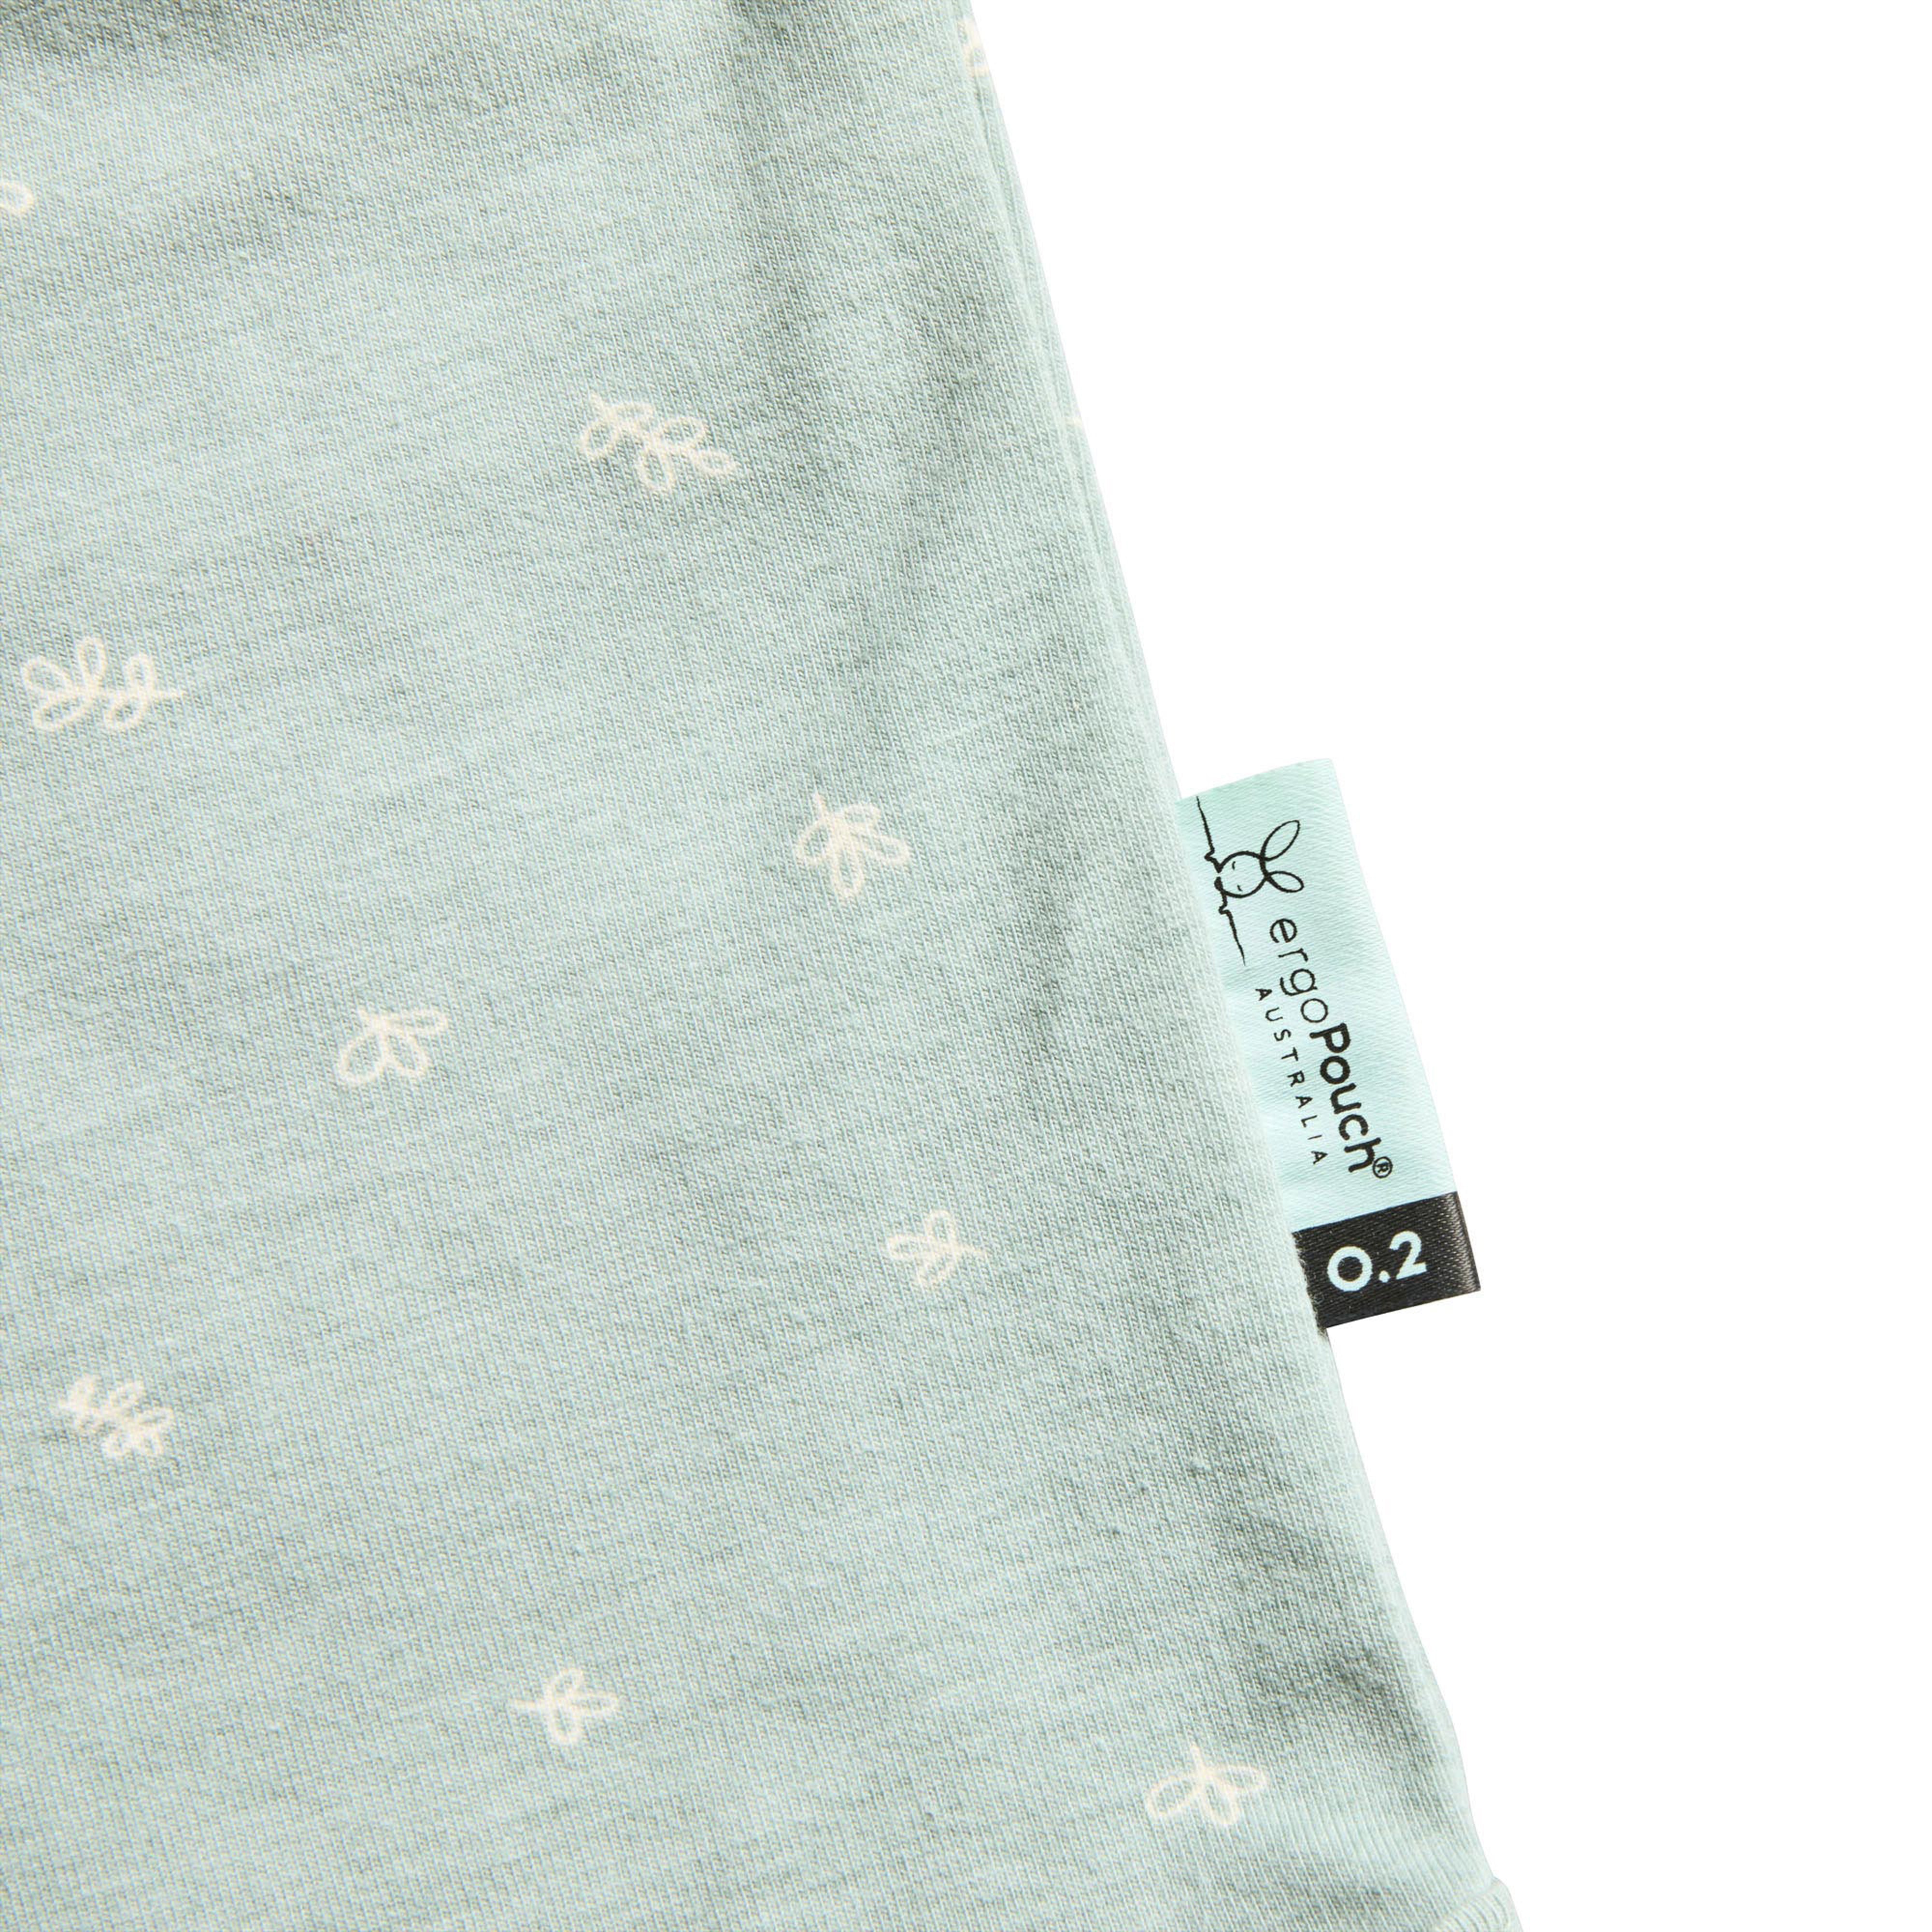 ergopouch-cocoon-swaddle-bag-0-2-tog-grey-marle-ergo-zepco-0-2t00-03mgm19- (6)